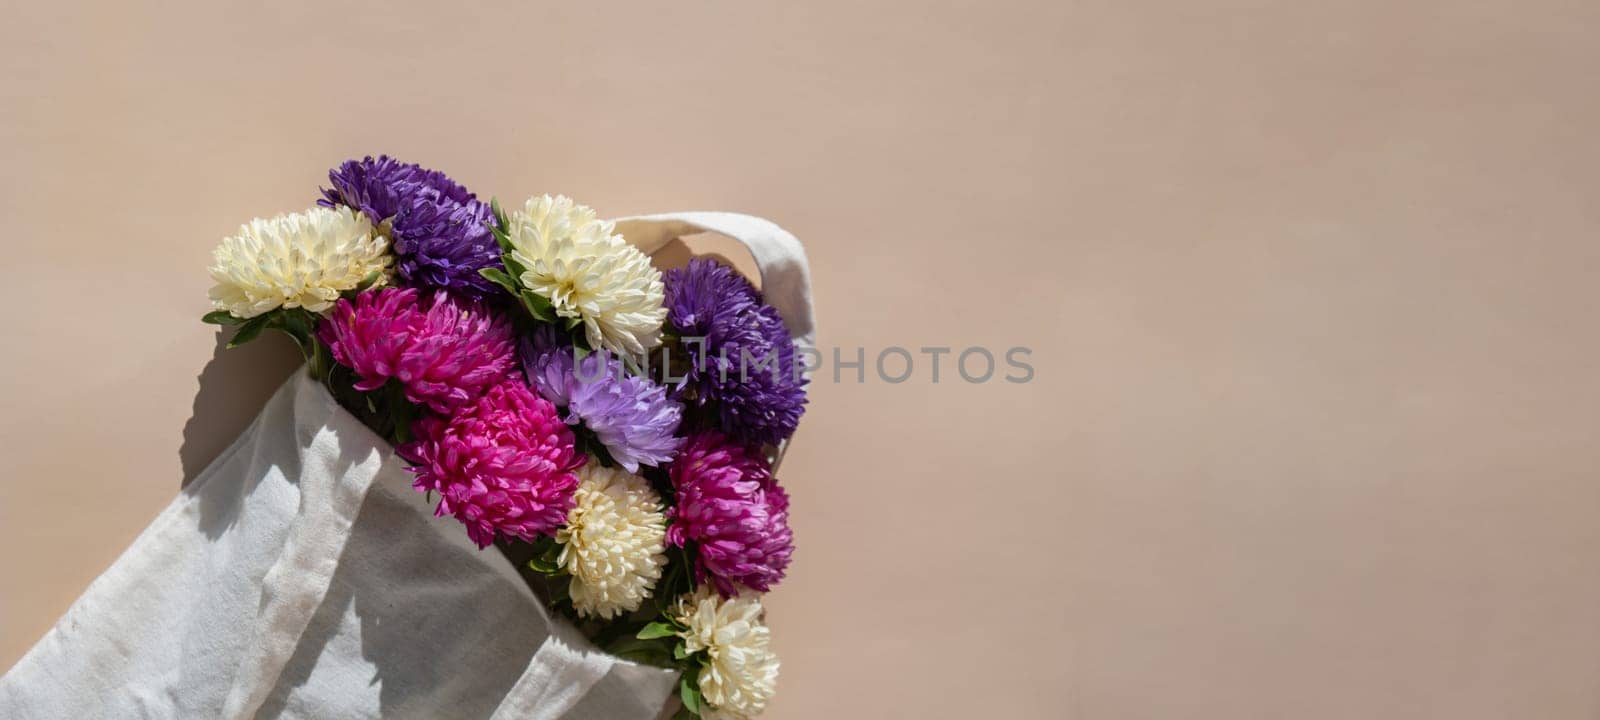 Bouquet of flowers in cotton natural bag for delivery. Copy space for text. Concept of holiday congratulation present or gift. Spring minimalistic